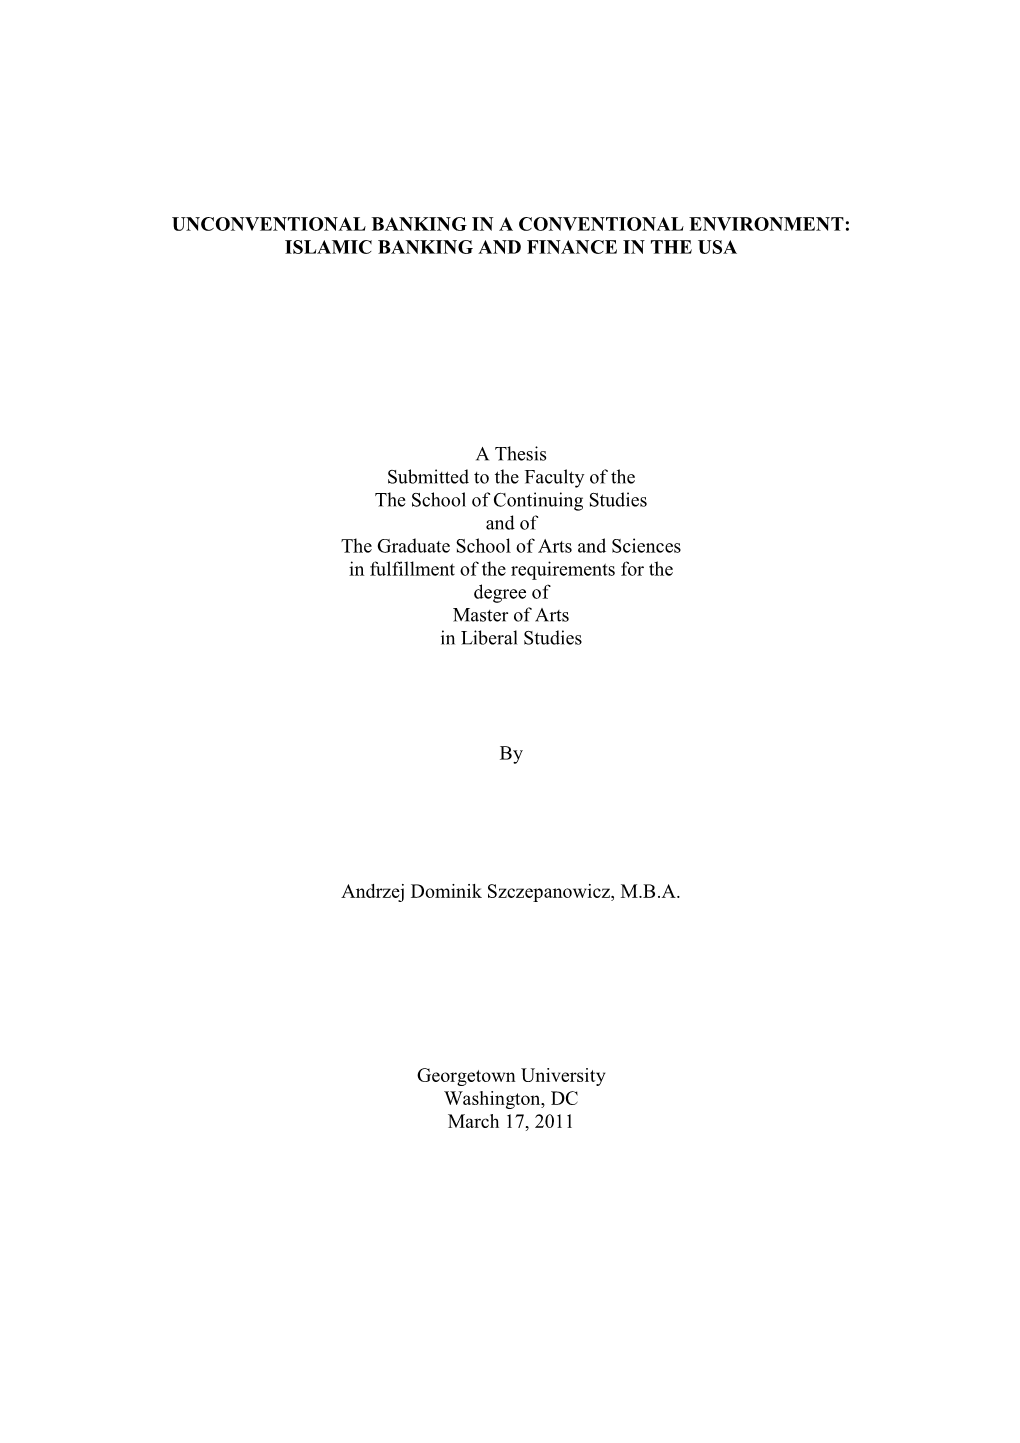 ISLAMIC BANKING and FINANCE in the USA a Thesis Submitted to The